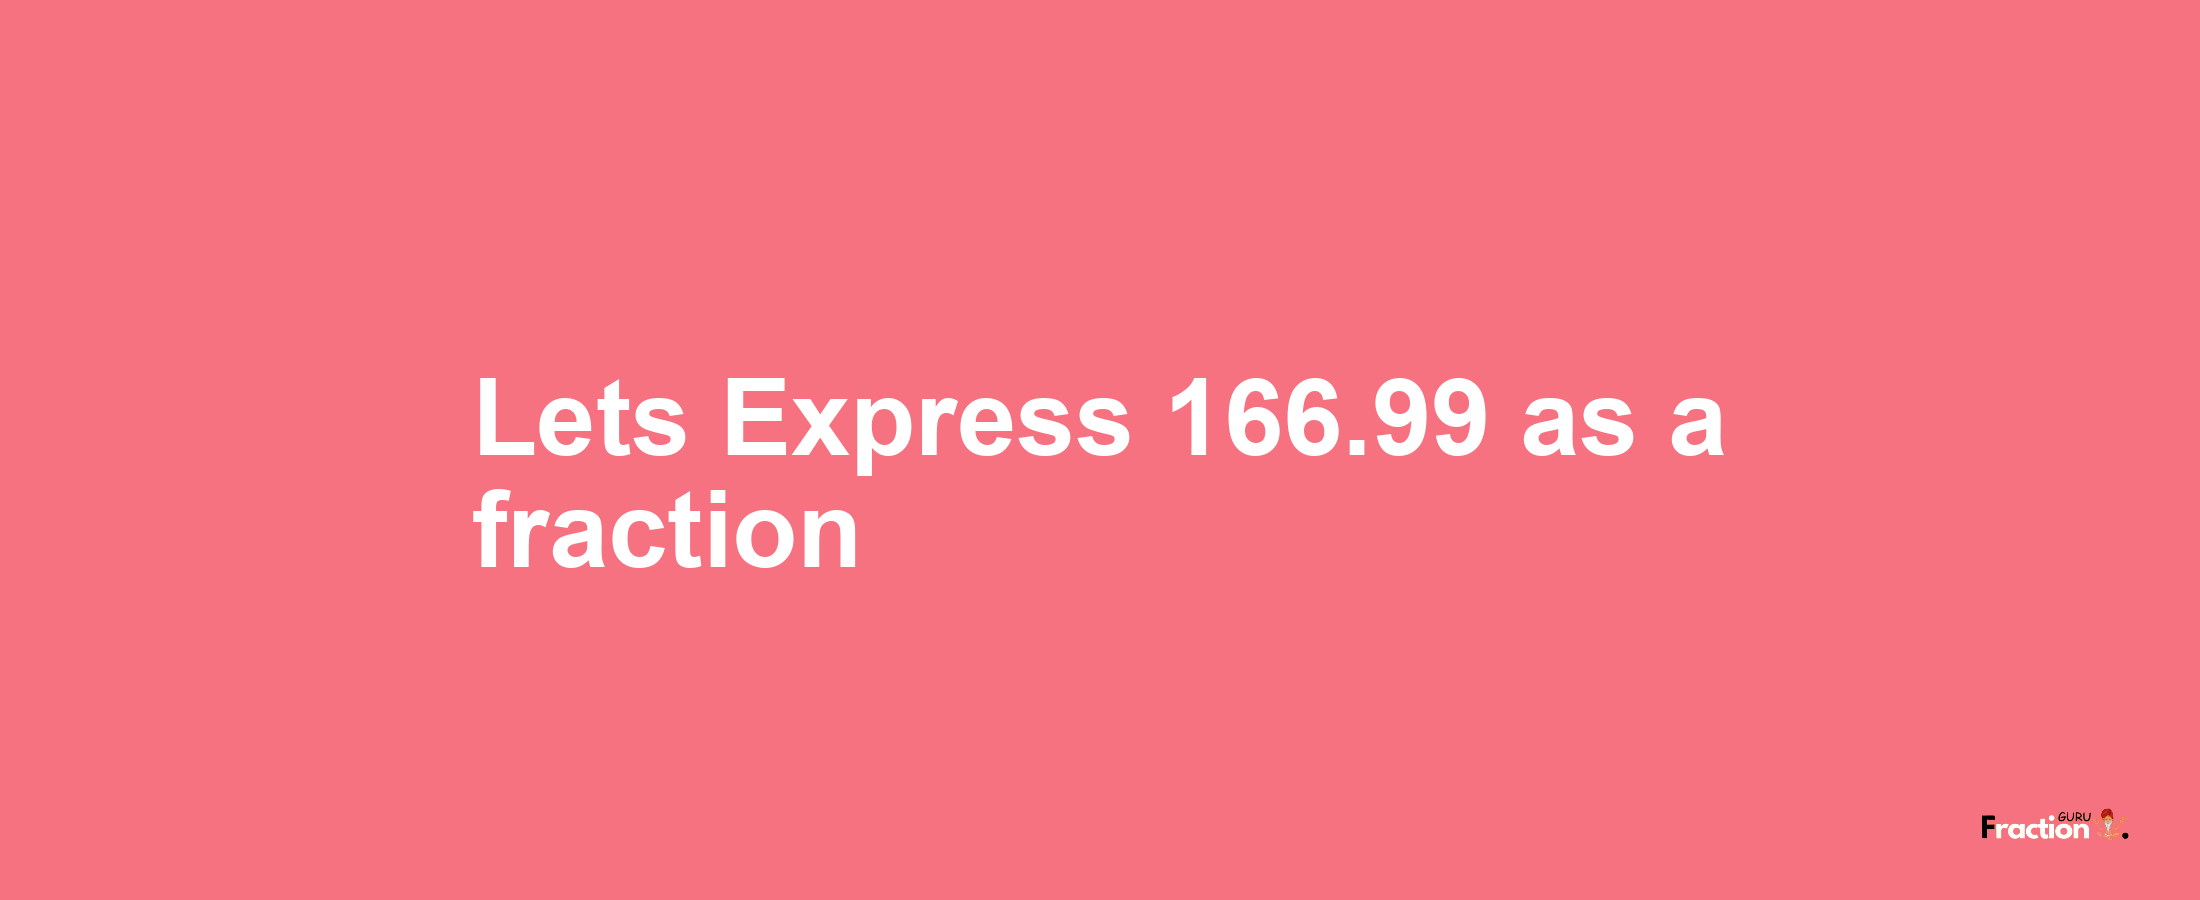 Lets Express 166.99 as afraction